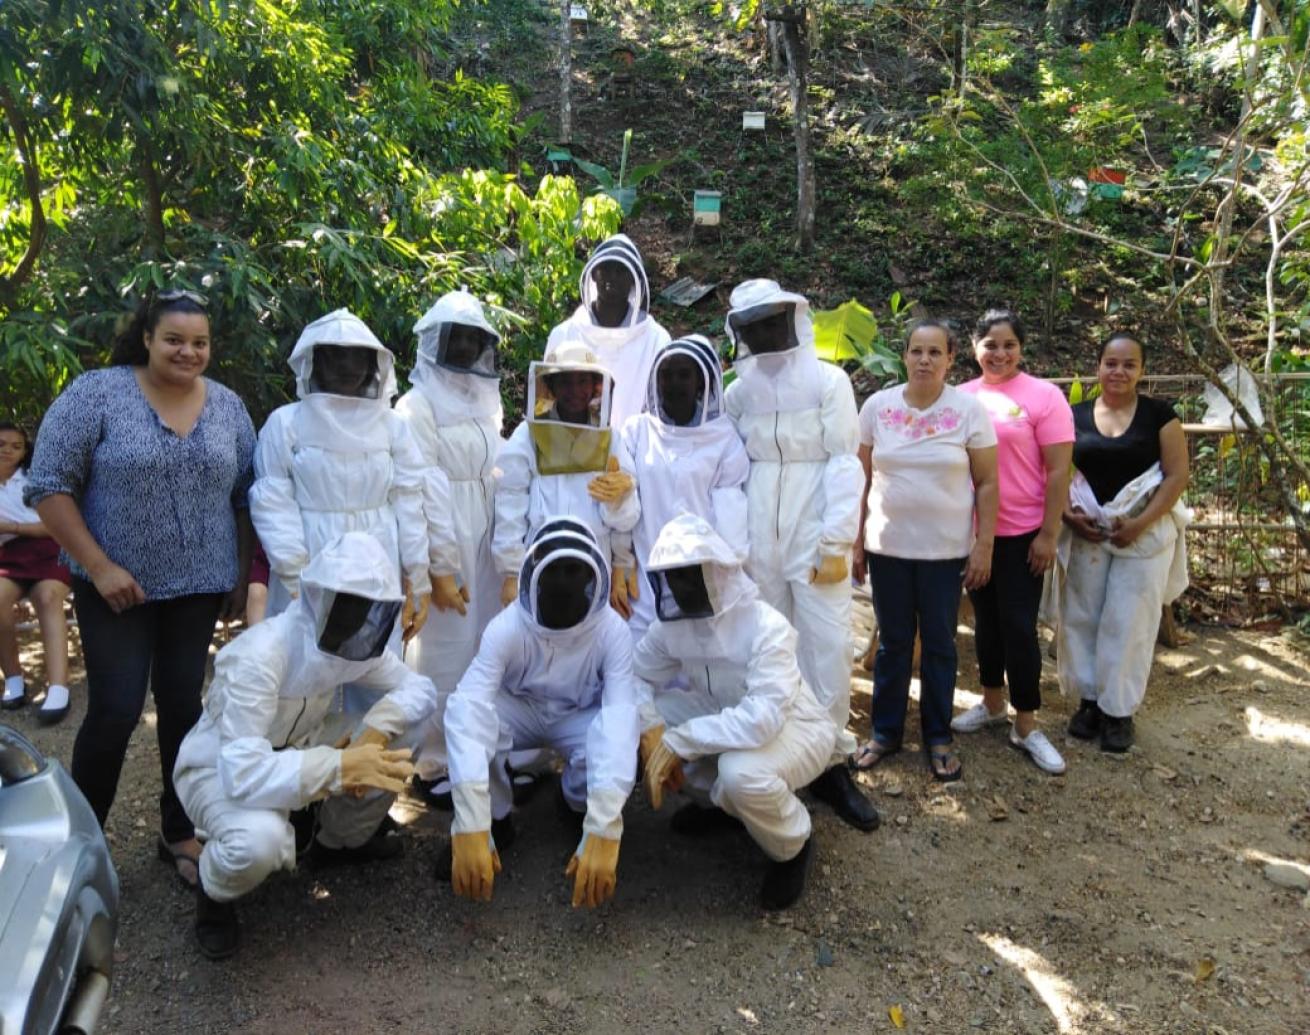 Demonstration of the honey extraction process to students from ESBIR School (Roatan Bilingual School) on March 2019